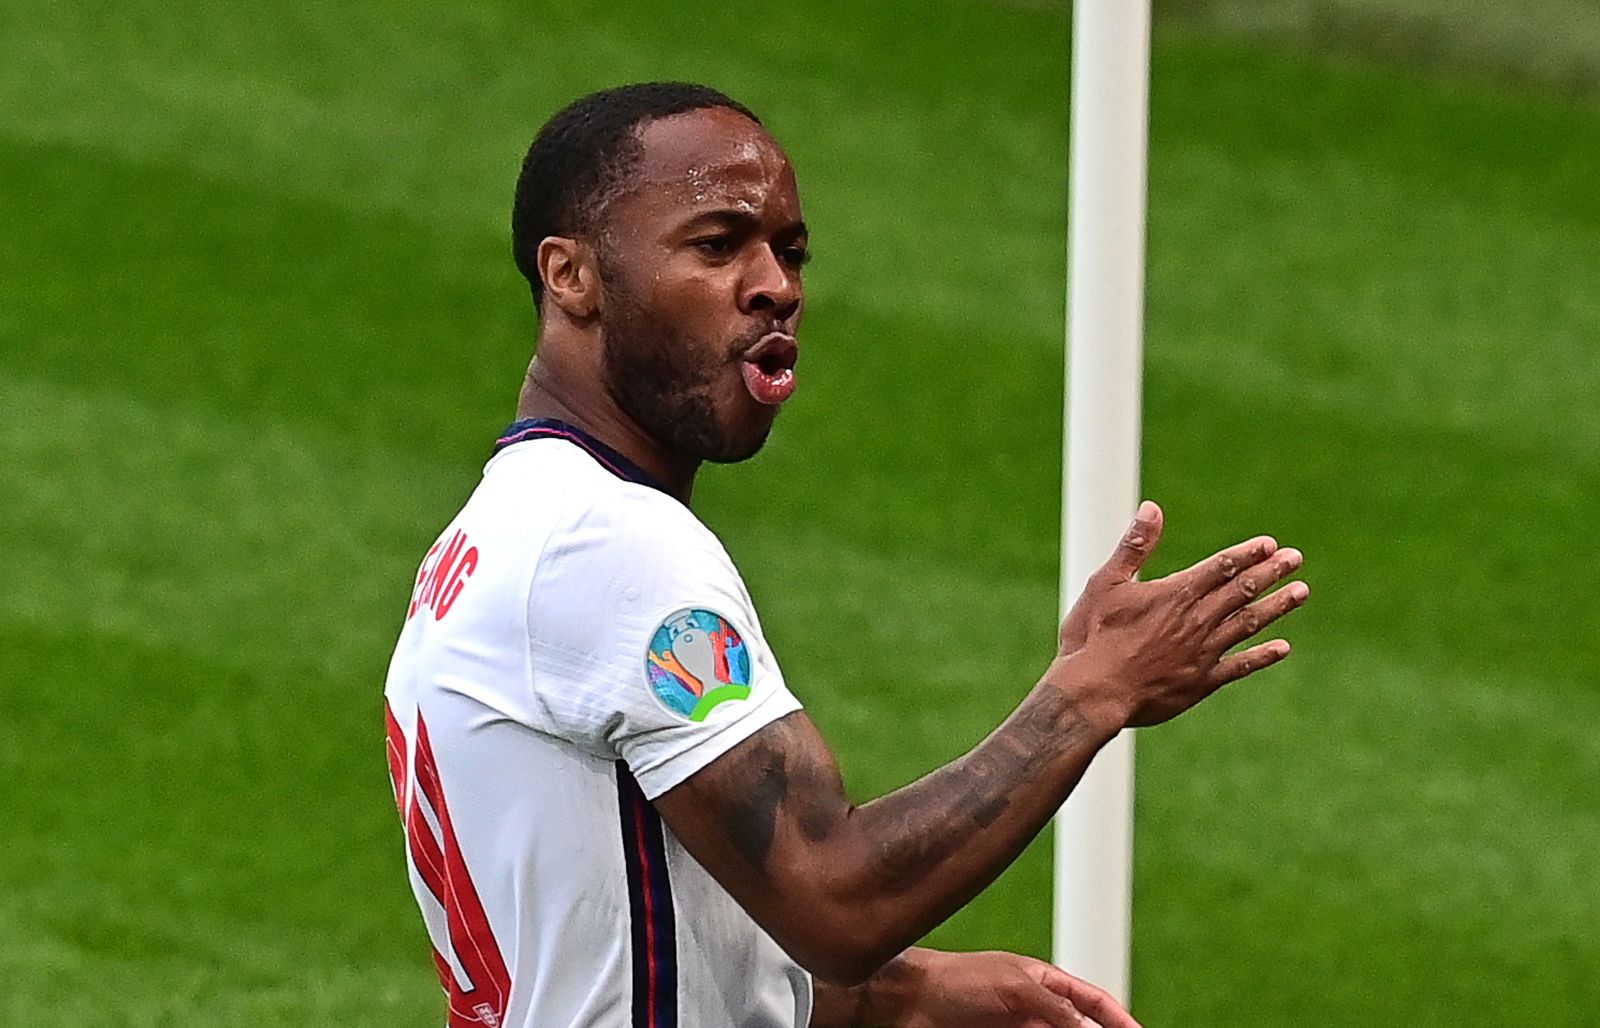 epa09294081 Raheem Sterling of England celebrates after scoring the 1-0 lead during the UEFA EURO 2020 group D preliminary round soccer match between the Czech Republic and England in London, Britain, 22 June 2021.  EPA/Neil Hall / POOL (RESTRICTIONS: For editorial news reporting purposes only. Images must appear as still images and must not emulate match action video footage. Photographs published in online publications shall have an interval of at least 20 seconds between the posting.)